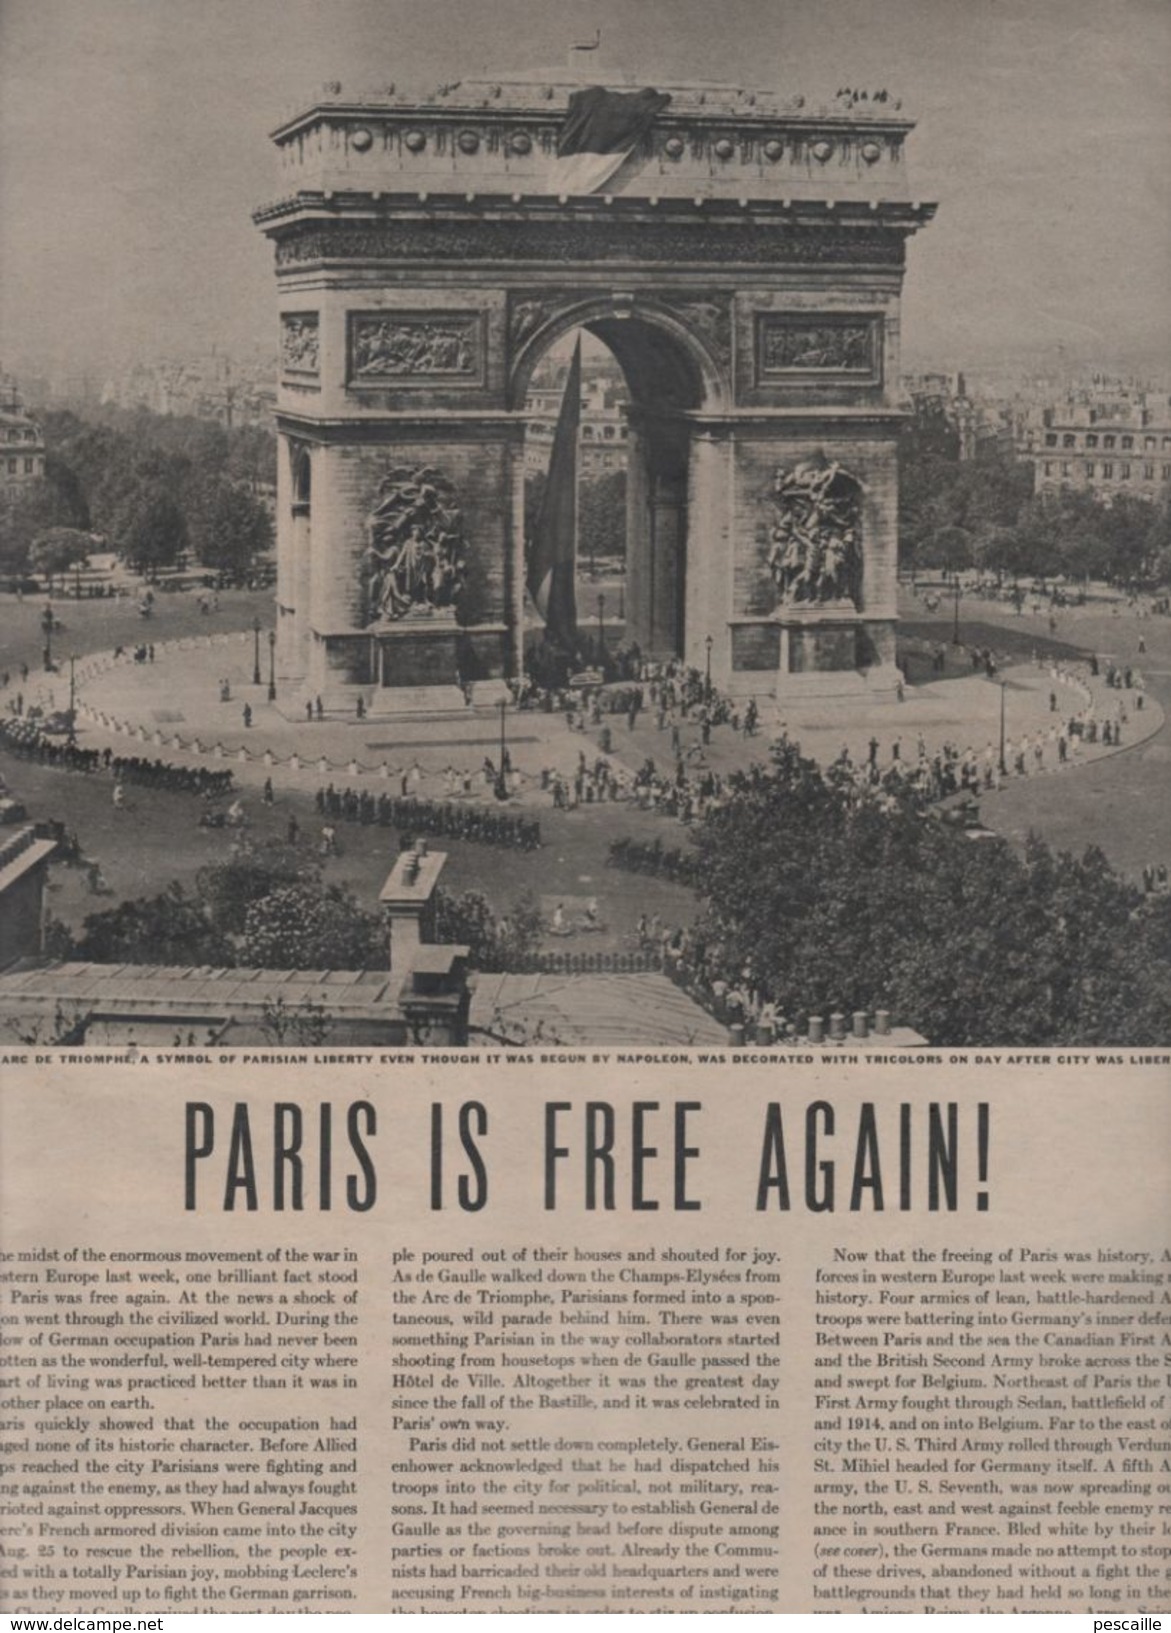 LIFE SEPTEMBER 11 1944 - EISENSTAEDT - PARIS FREE AGAIN DE GAULLE - PAWLING N.Y. - PIN-UP - AIRWAY TO CHINA / THE HUMP - - Military/ War